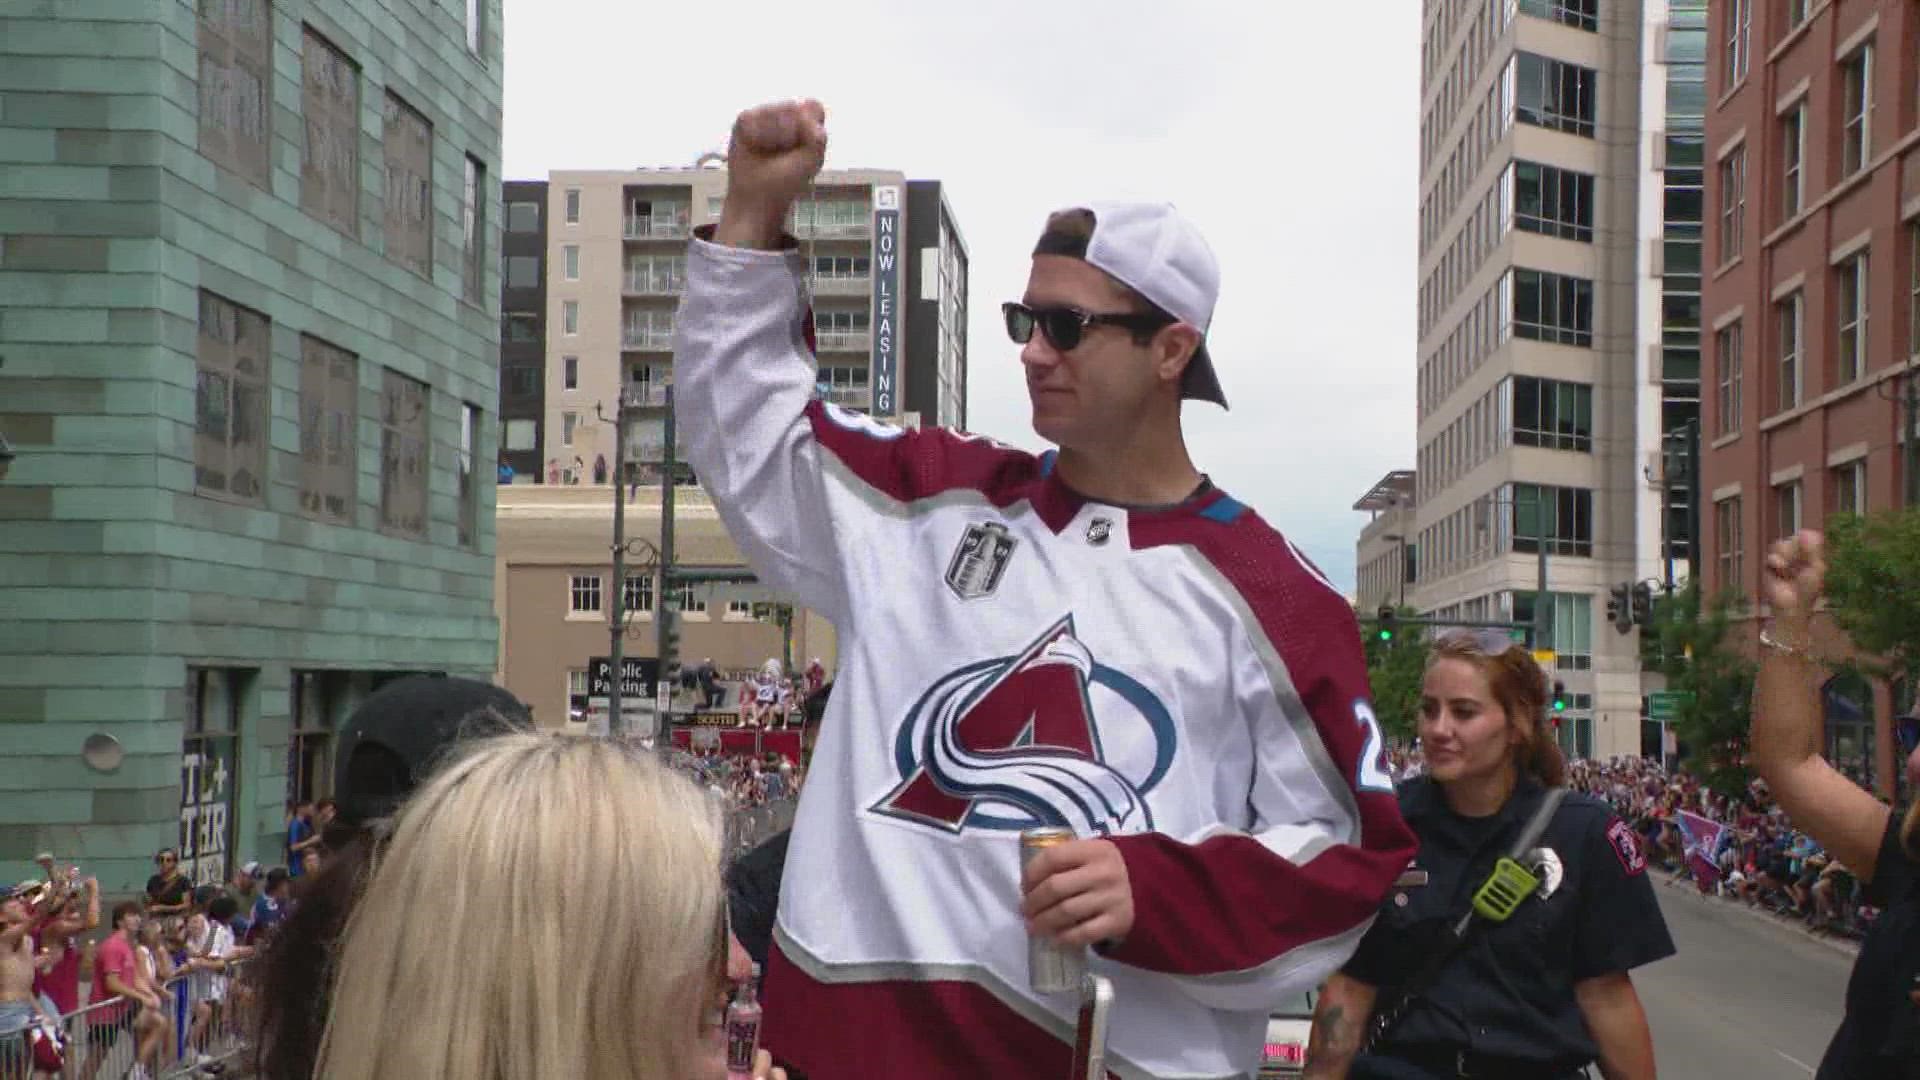 9NEWS Arielle Orsuto is back out at Civic Center Park where fans gather to celebrate the Colorado Avalanche's Stanley Cup win.